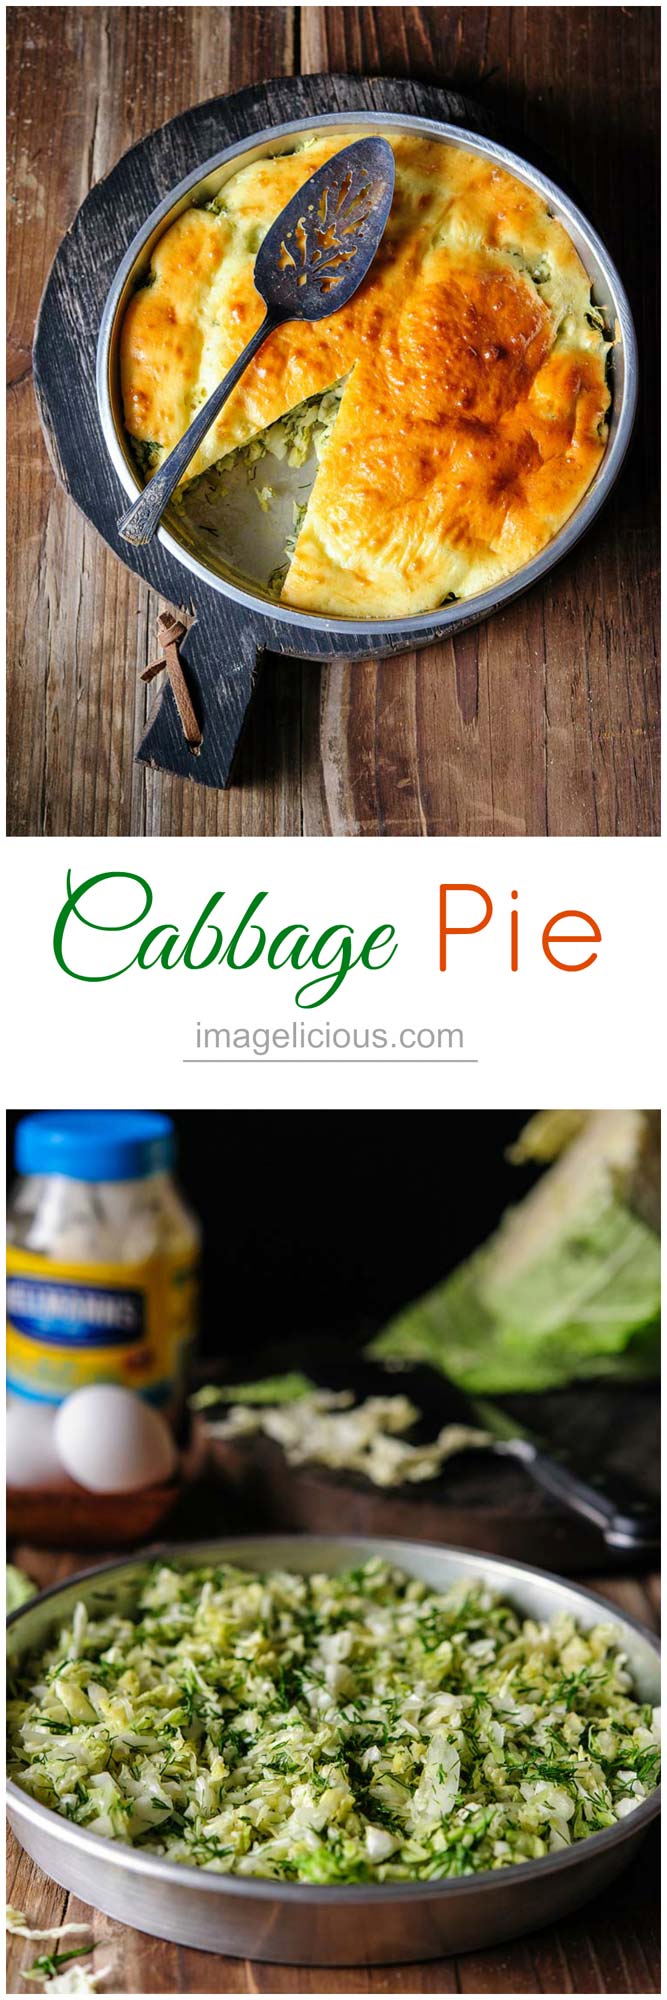 Cabbage Pie - cabbage, eggs, dill and quick mayonnaise based batter - delicious lunch or dinner perfect for any time of the year. Healthy and low carb | Imagelicious